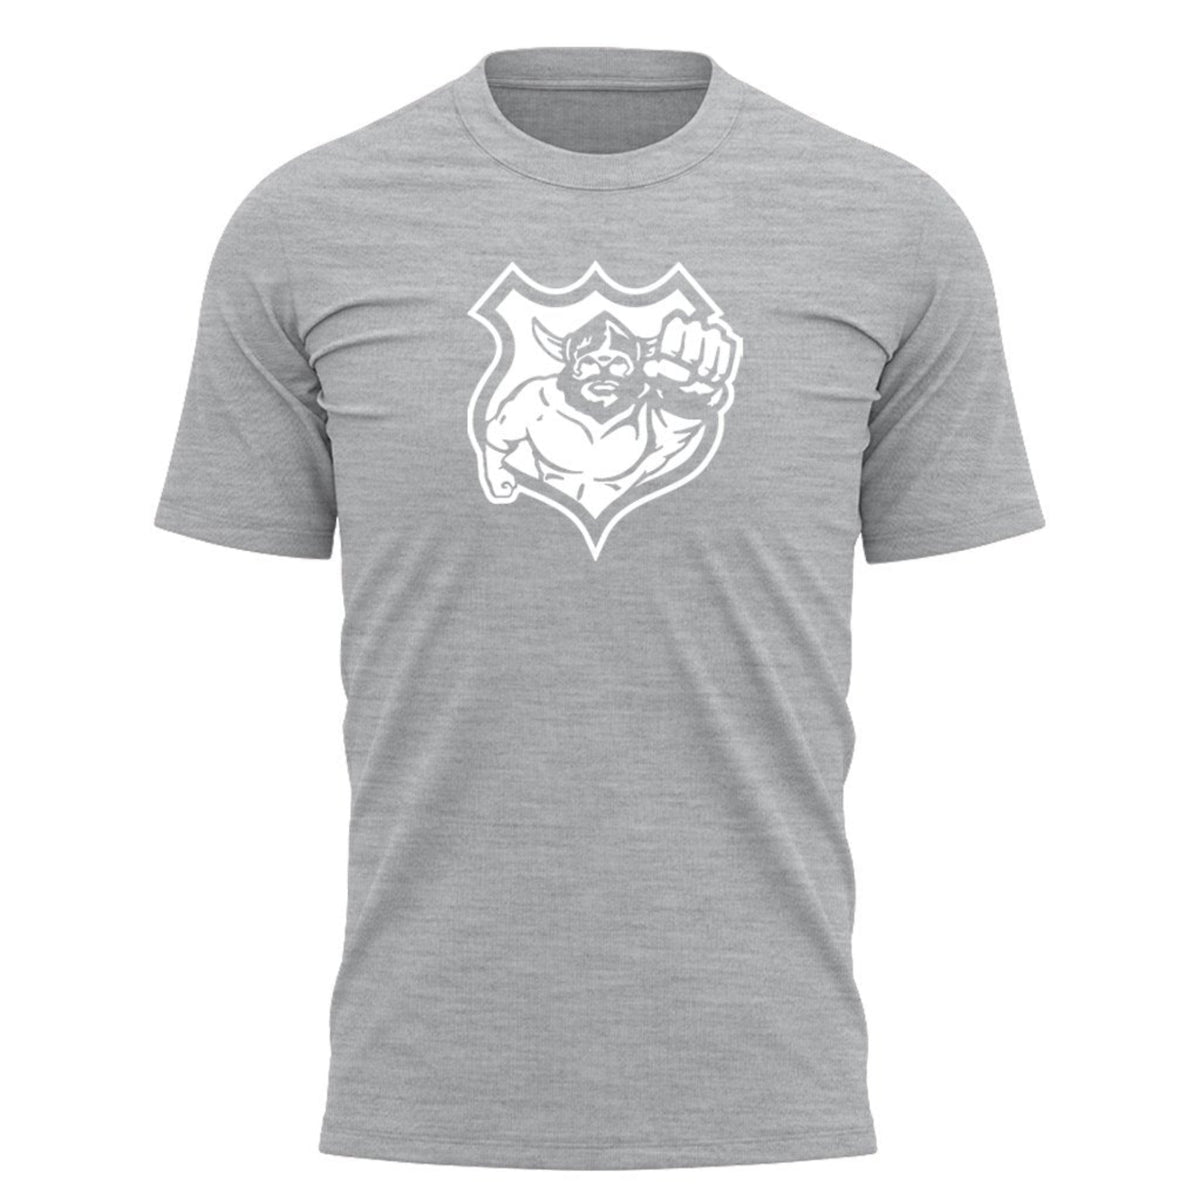 Seattle Vikings Graphic Tee - www.therugbyshop.com www.therugbyshop.com MEN&#39;S / Athletic Grey / S XIX Brands TEES Seattle Vikings Graphic Tee